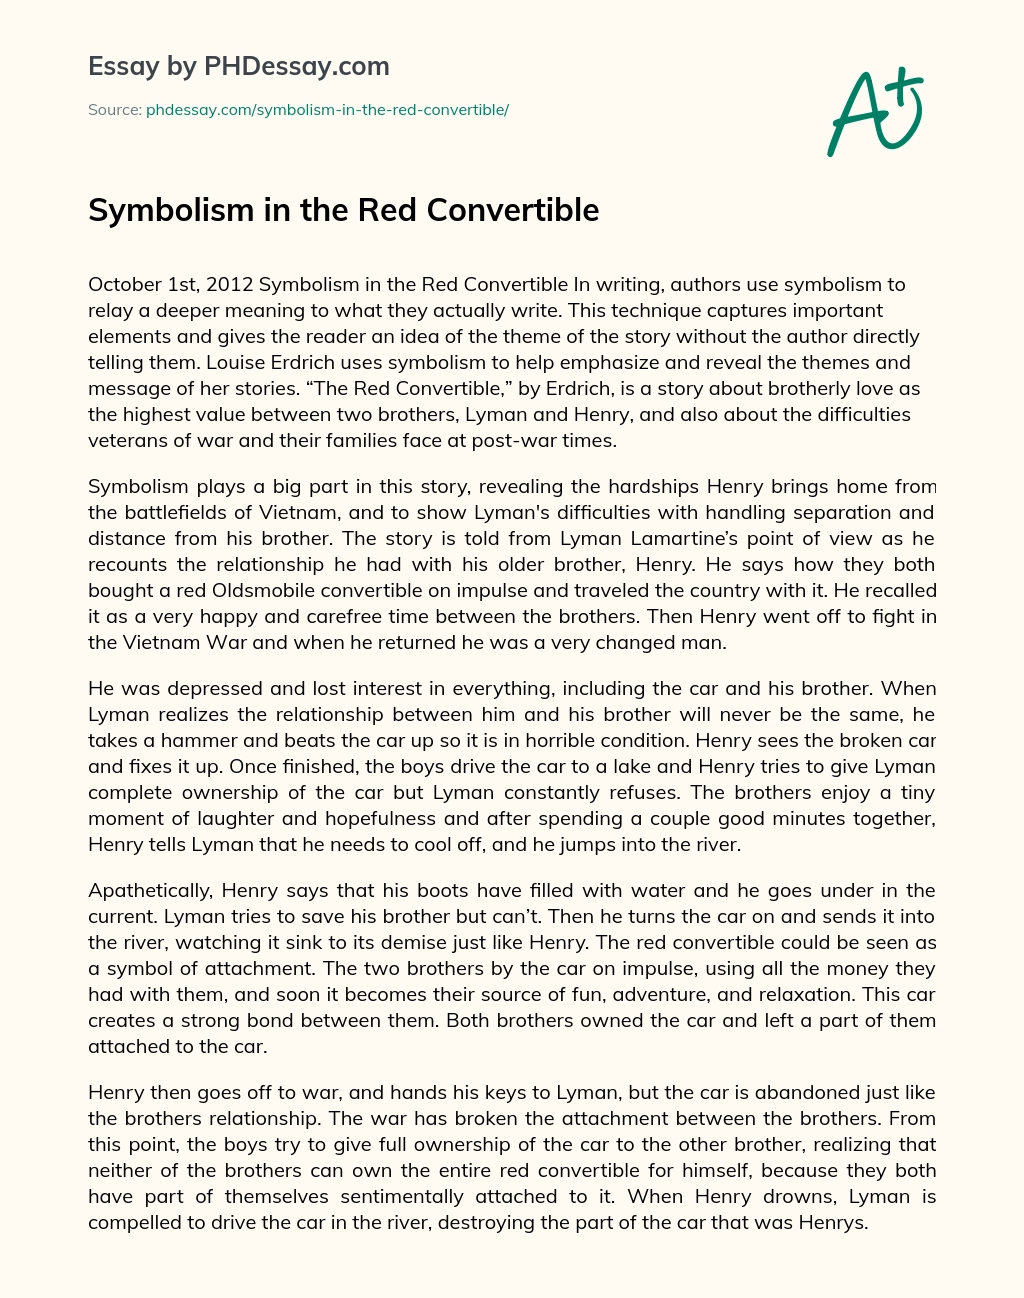 Symbolism in the Red Convertible essay